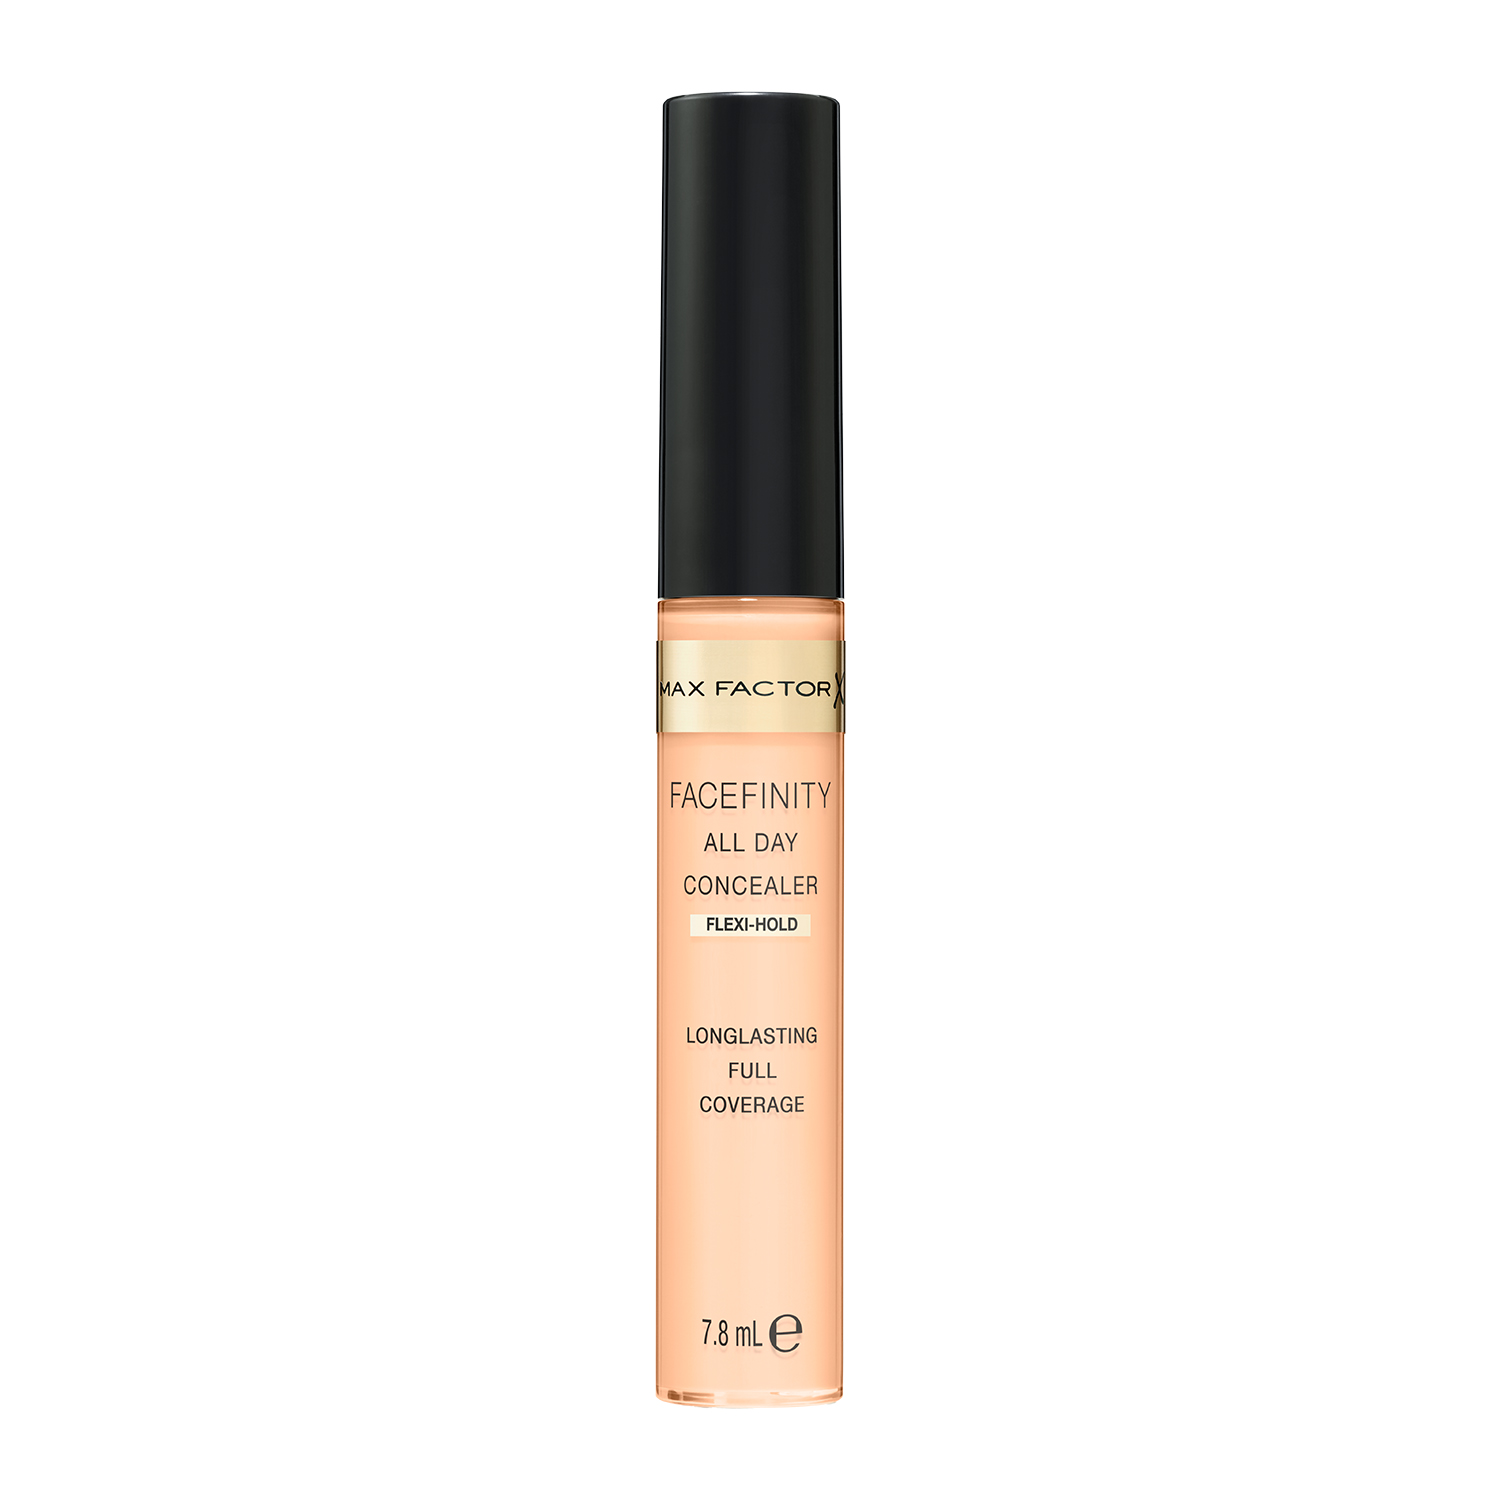 Консилер Max Factor Facefinity All Day Concealer, тон 010, 7,8 мл (8000019012105) - фото 1